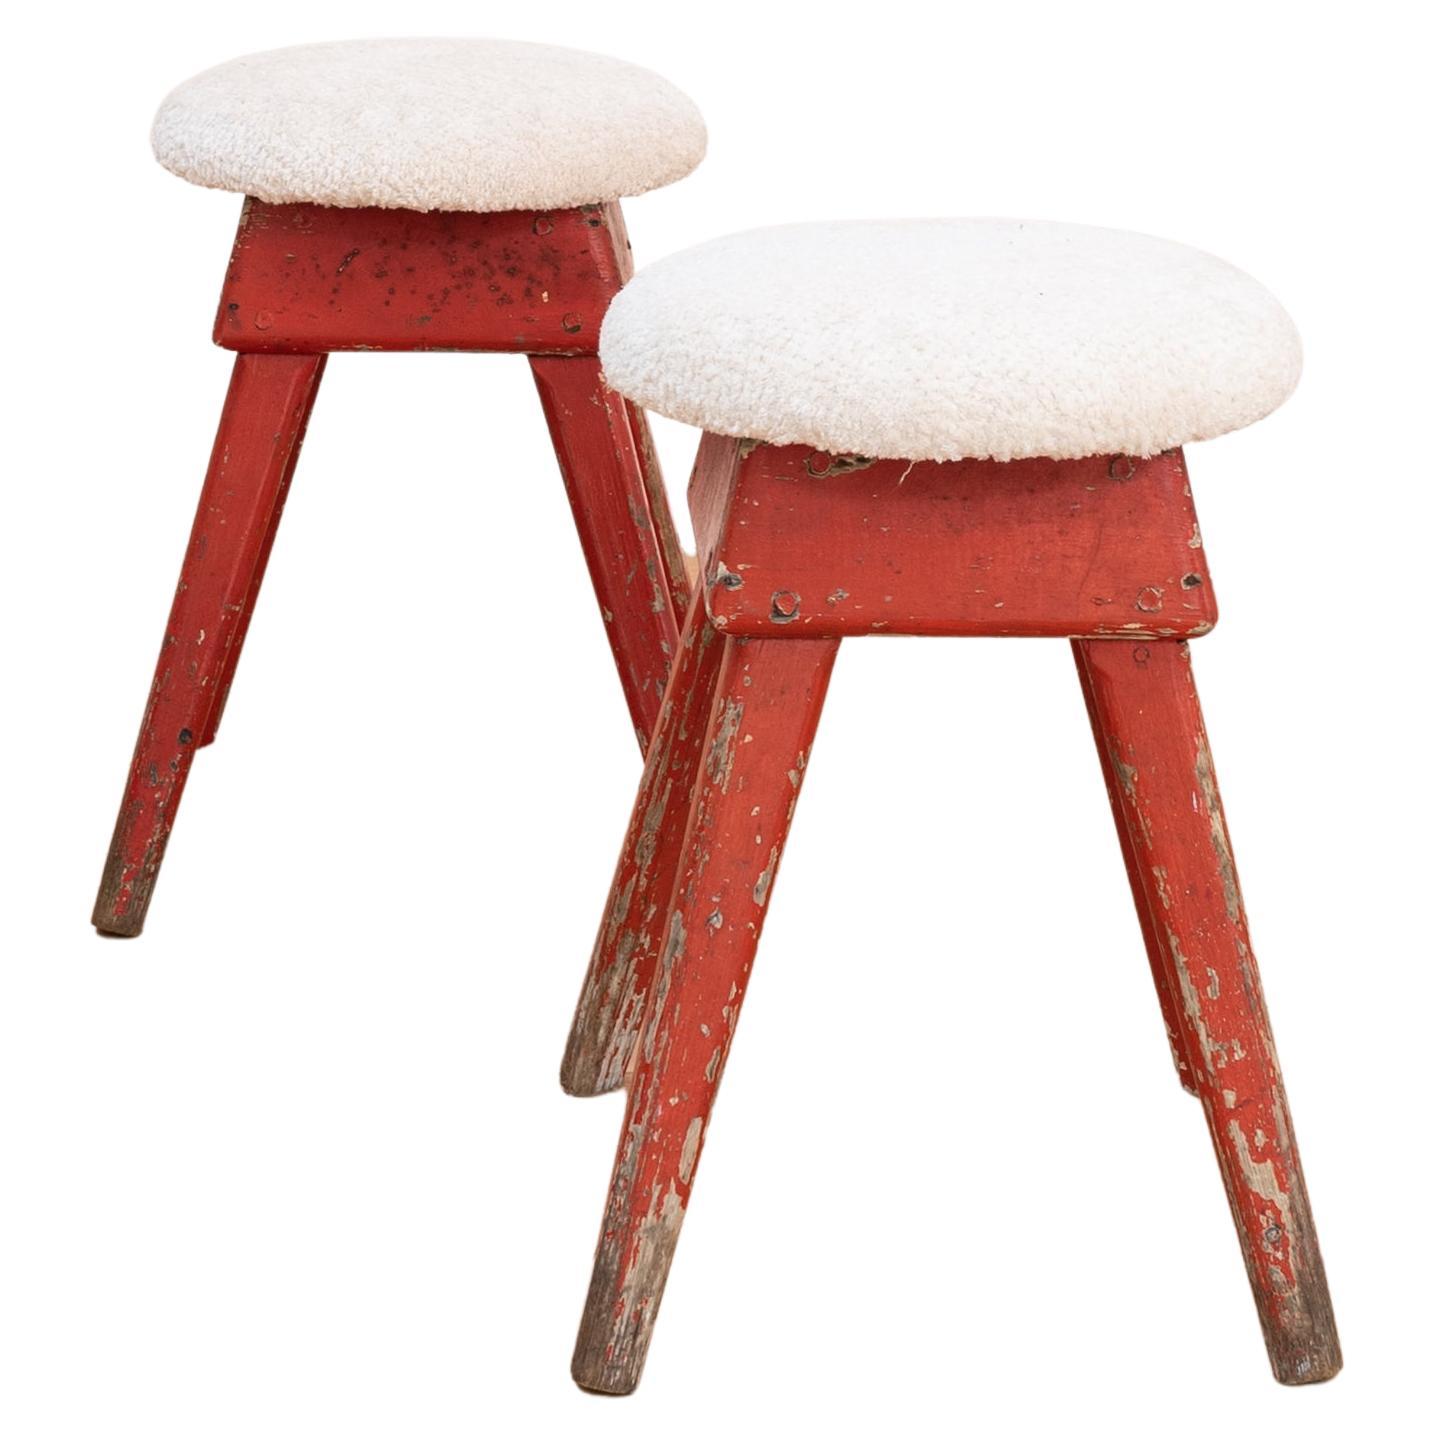 Pair of industrial red wooden stool with new wool off-white upholstery For Sale